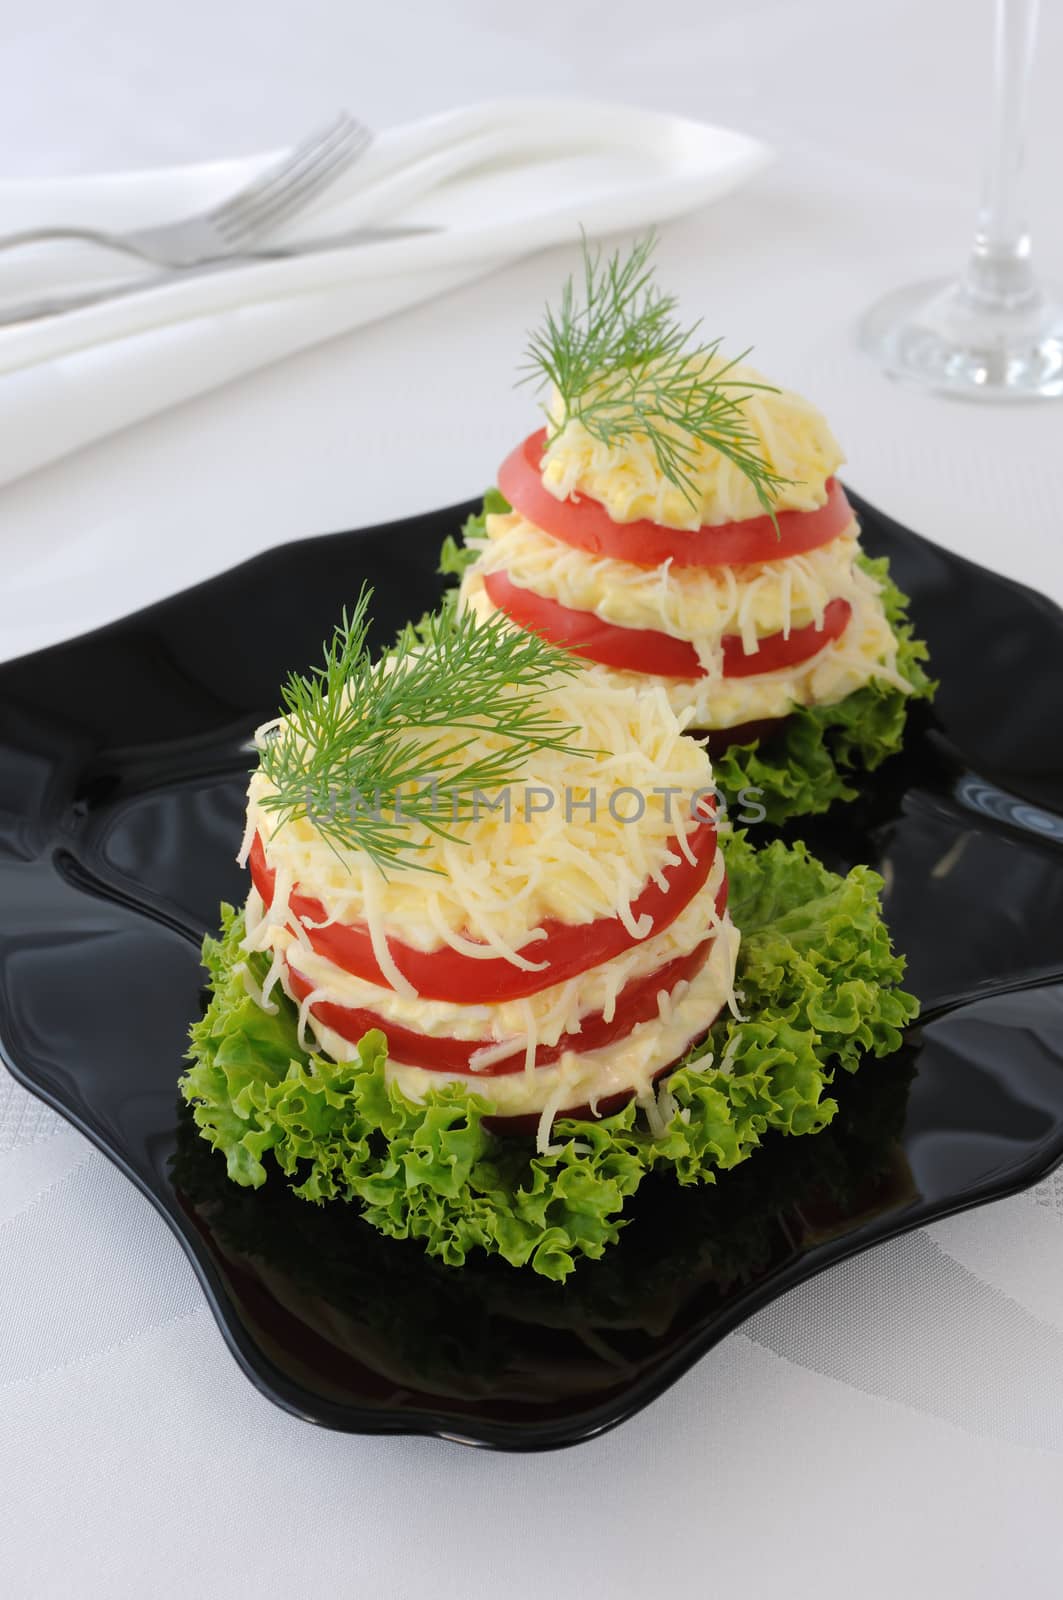 Appetizer of tomatoes stuffed with a spicy cheese and egg